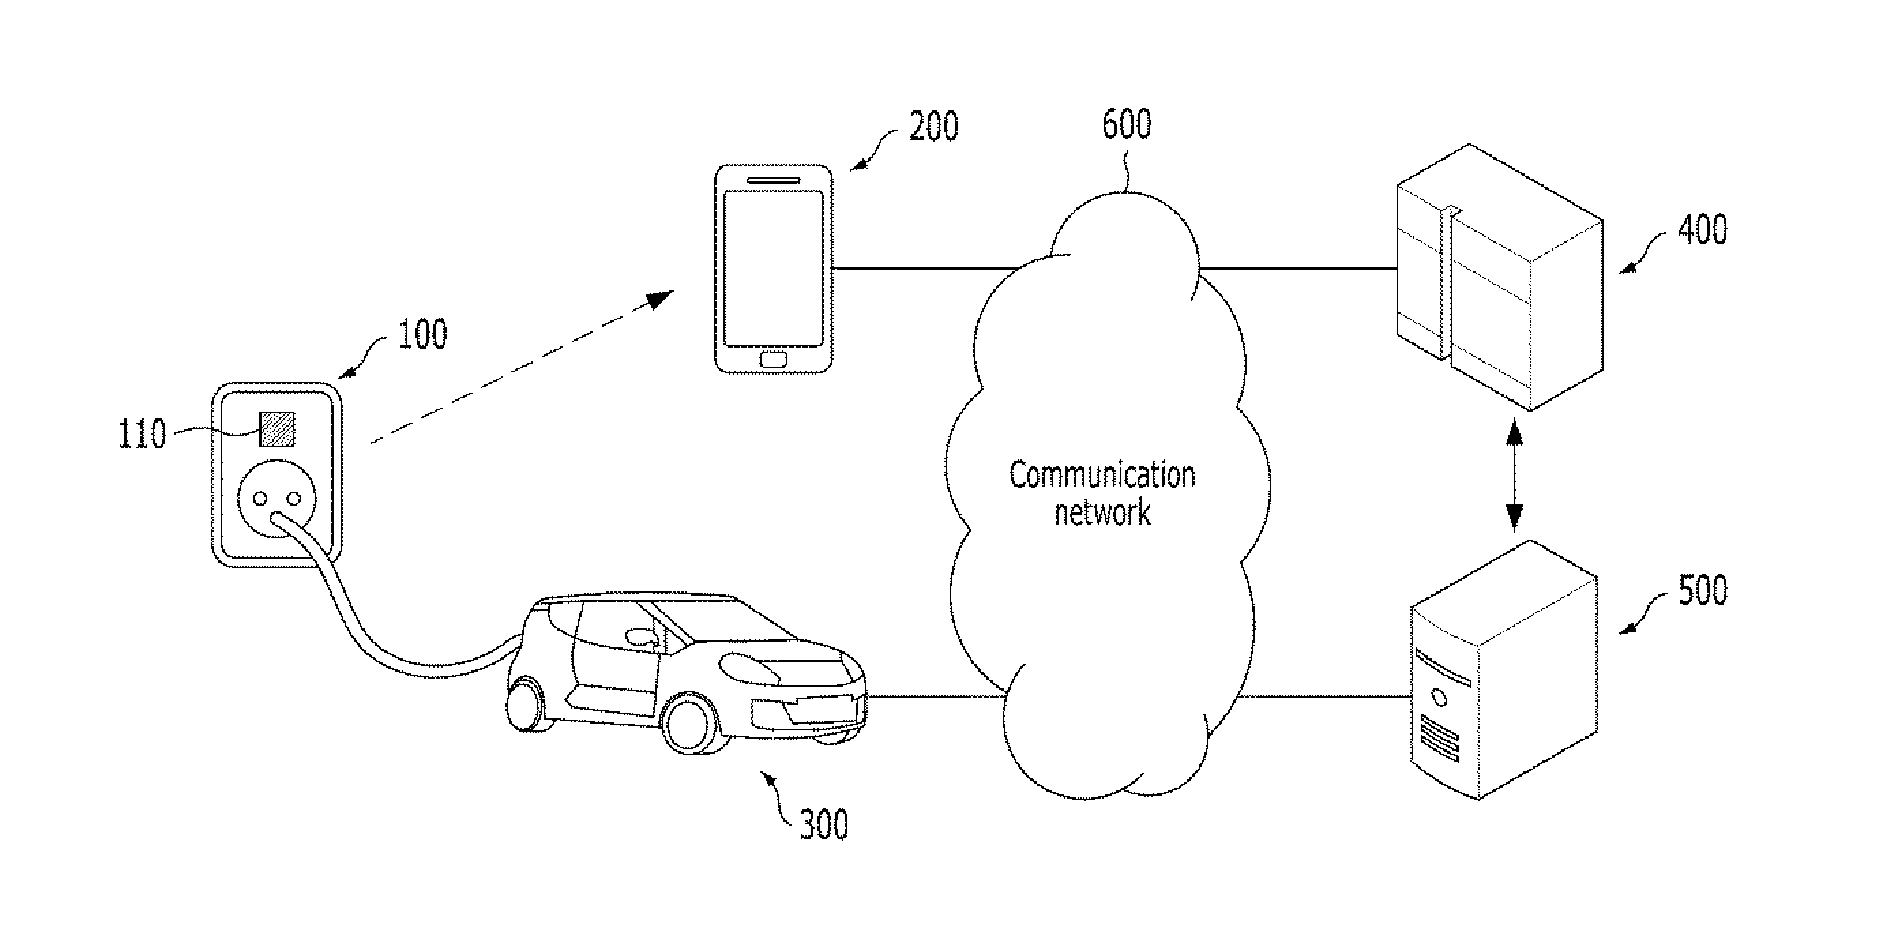 Electric charging management of electric vehicle